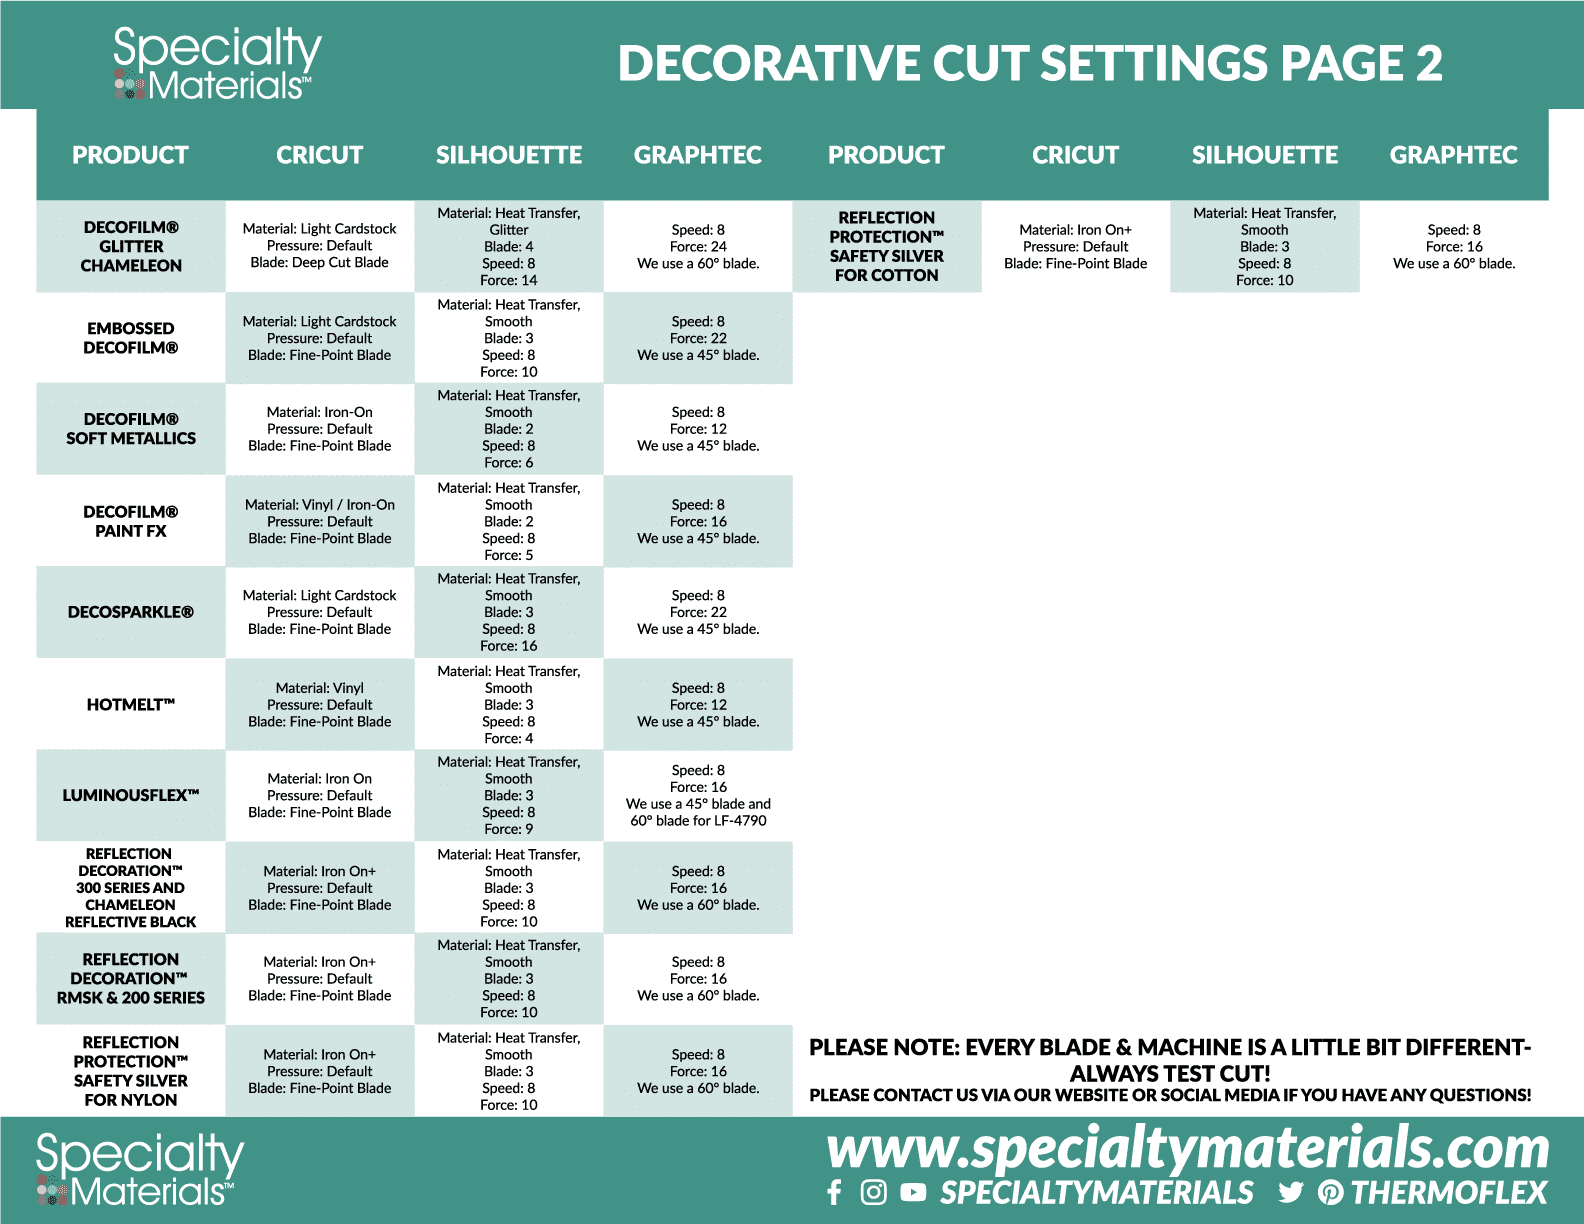 An infographic image detailing cut settings for decorative materials. This is page 2.